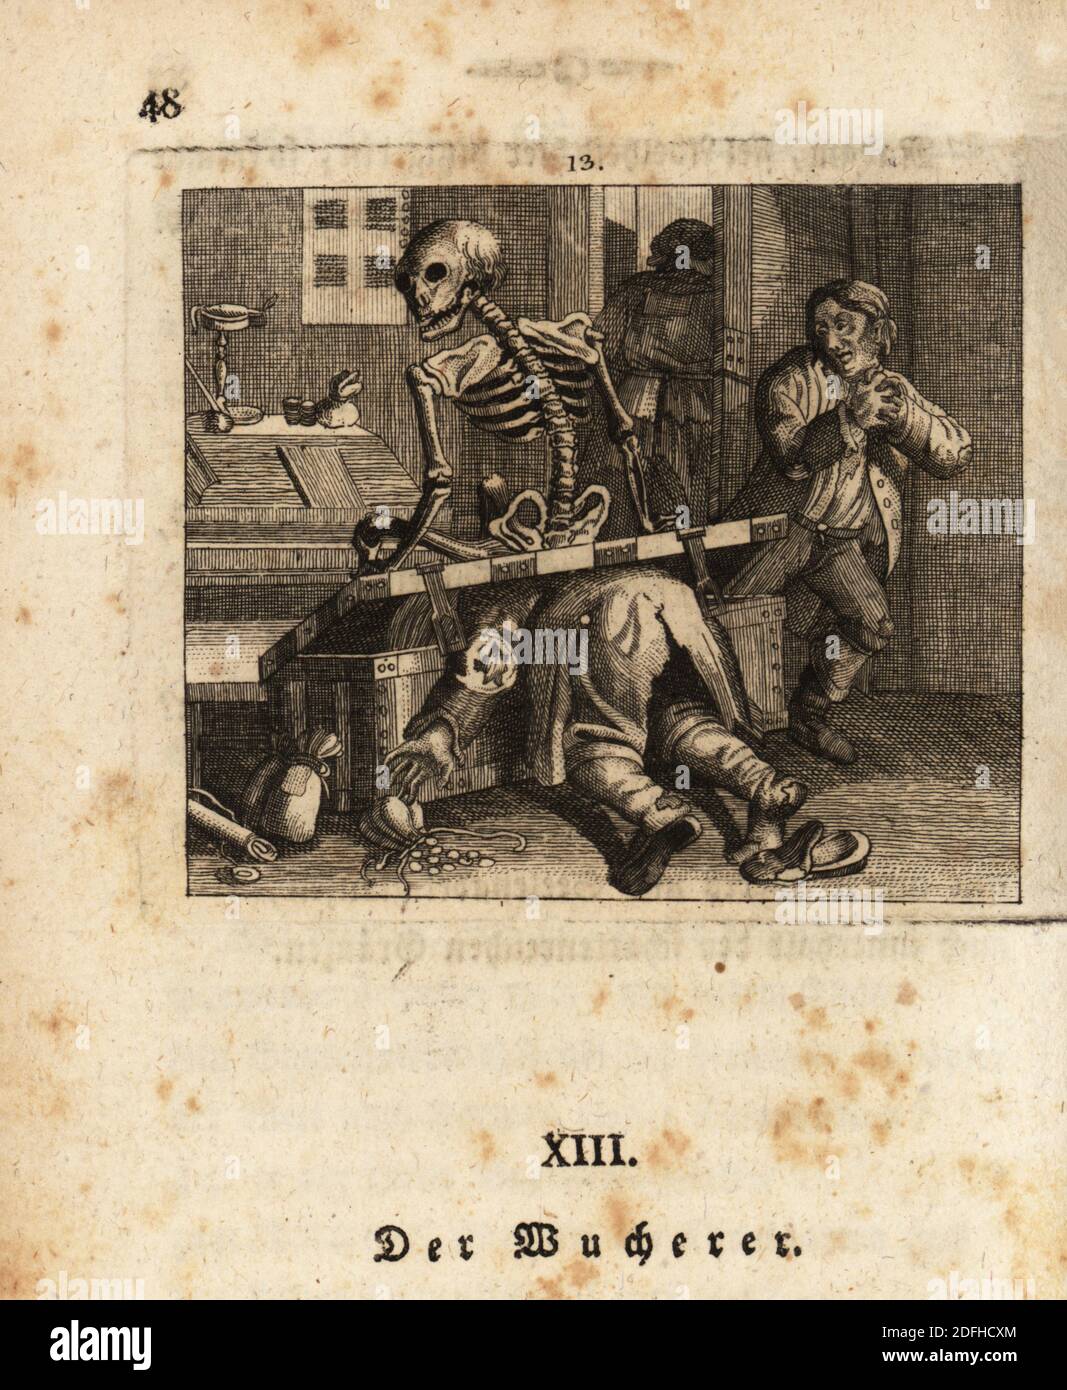 The skeleton of Death, Freund Hans, crushing a userer in his money chest, 18th century. The miser drops bags of gold coins on the floor, while his servants watch in horror. The loan shark or usurer. Der Wucherer. Copperplate engraving by Johan Georg Mansfeld after an original by Johann Rudolf Schellenberg from Johan Kark Musaus’s Freund Heins Erscheinungen in Holbeins Manier, (Apparitions of Death in the manner of Holbein) Mannheim, 1803. Stock Photo